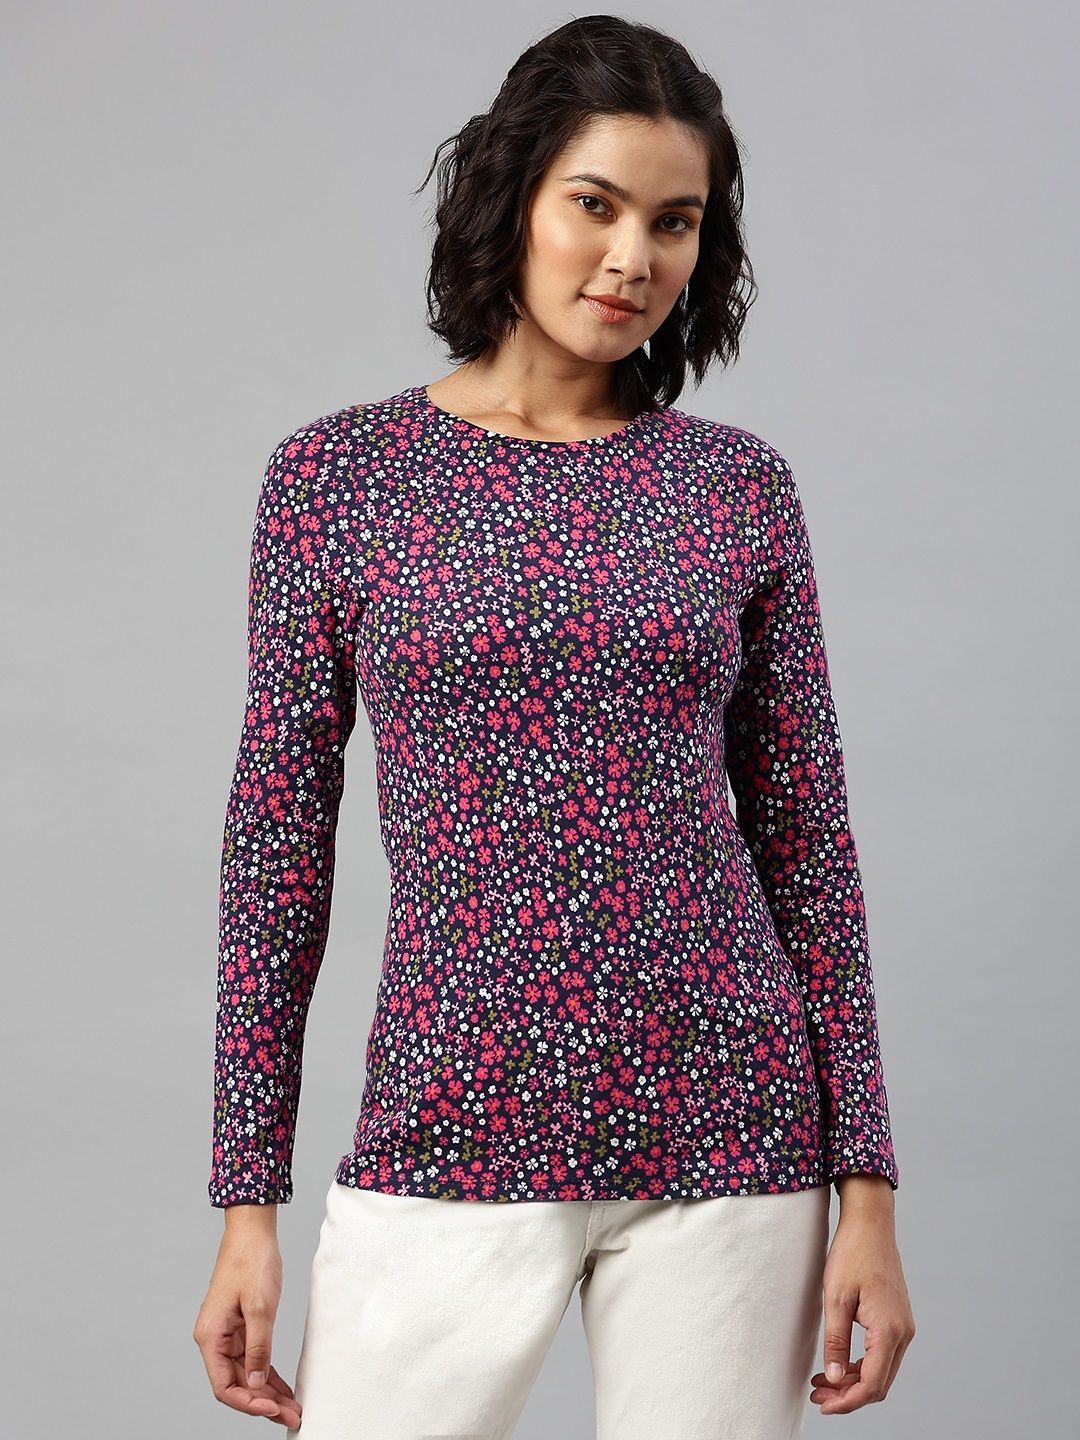 Marks & Spencer Purple & Pink Floral Print Top Price in India